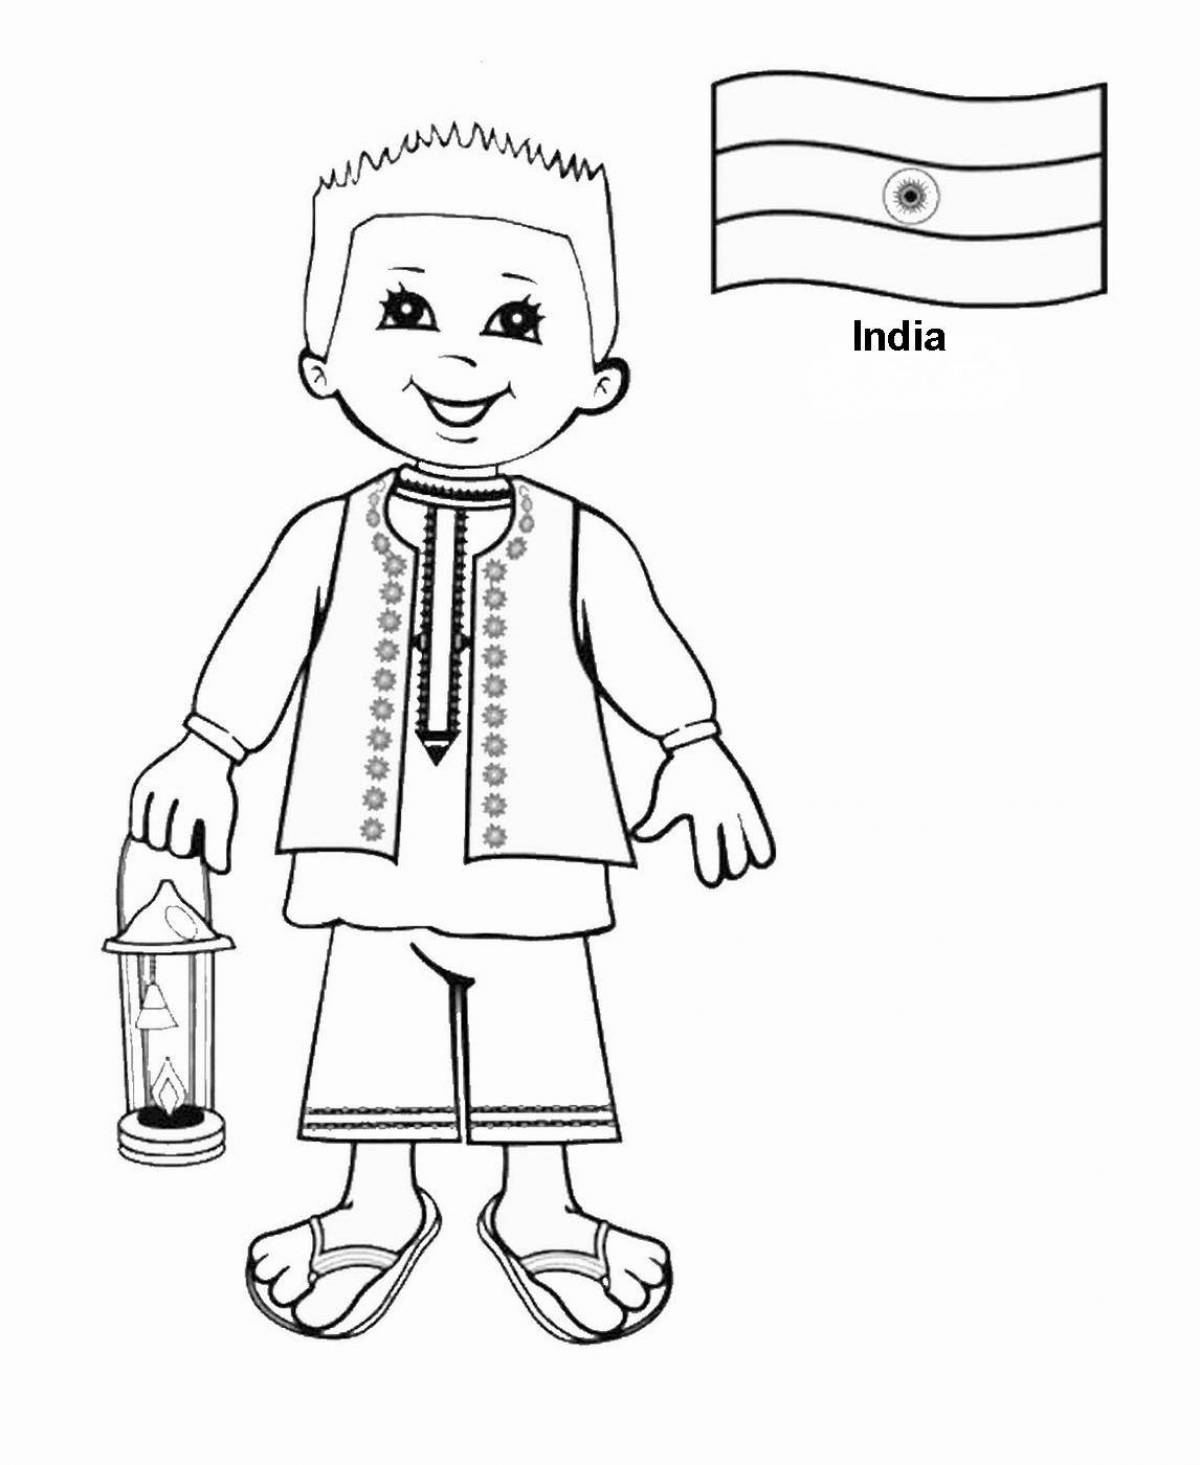 Color-frenzy coloring pages of different nationalities